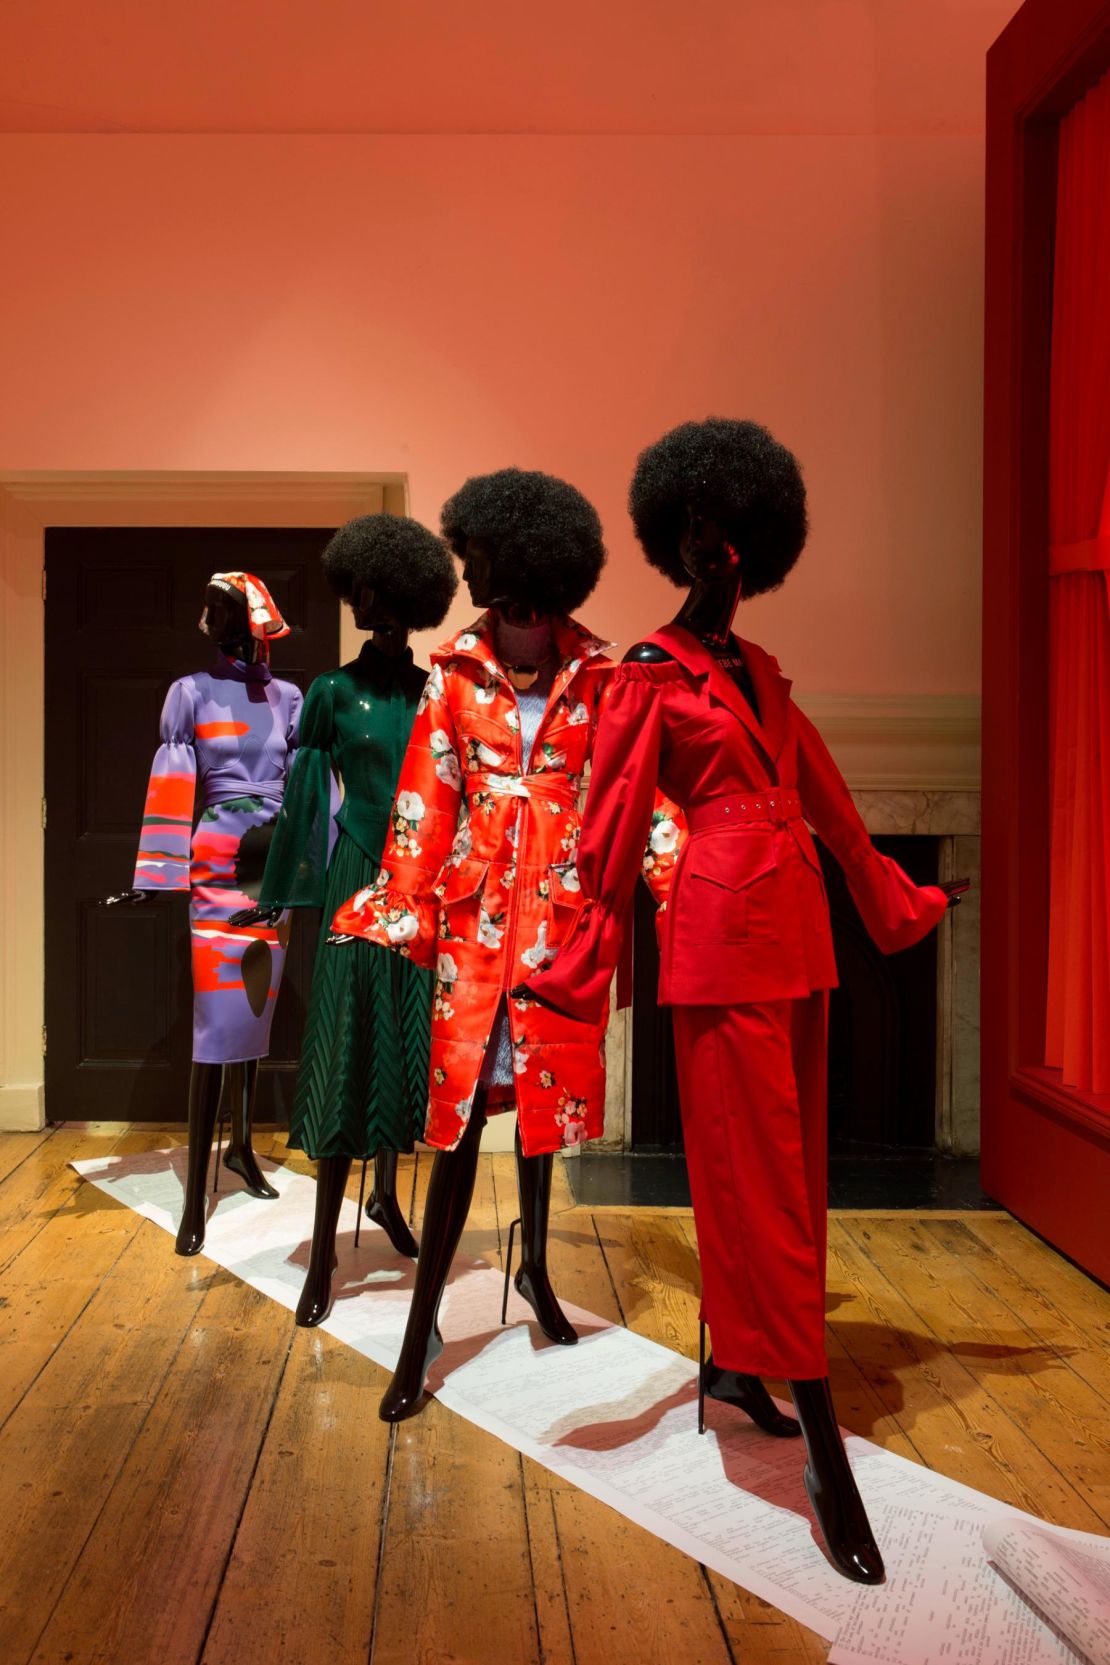 Thebe Magugu's installation at the International Fashion Showcase in Somerset House, London.